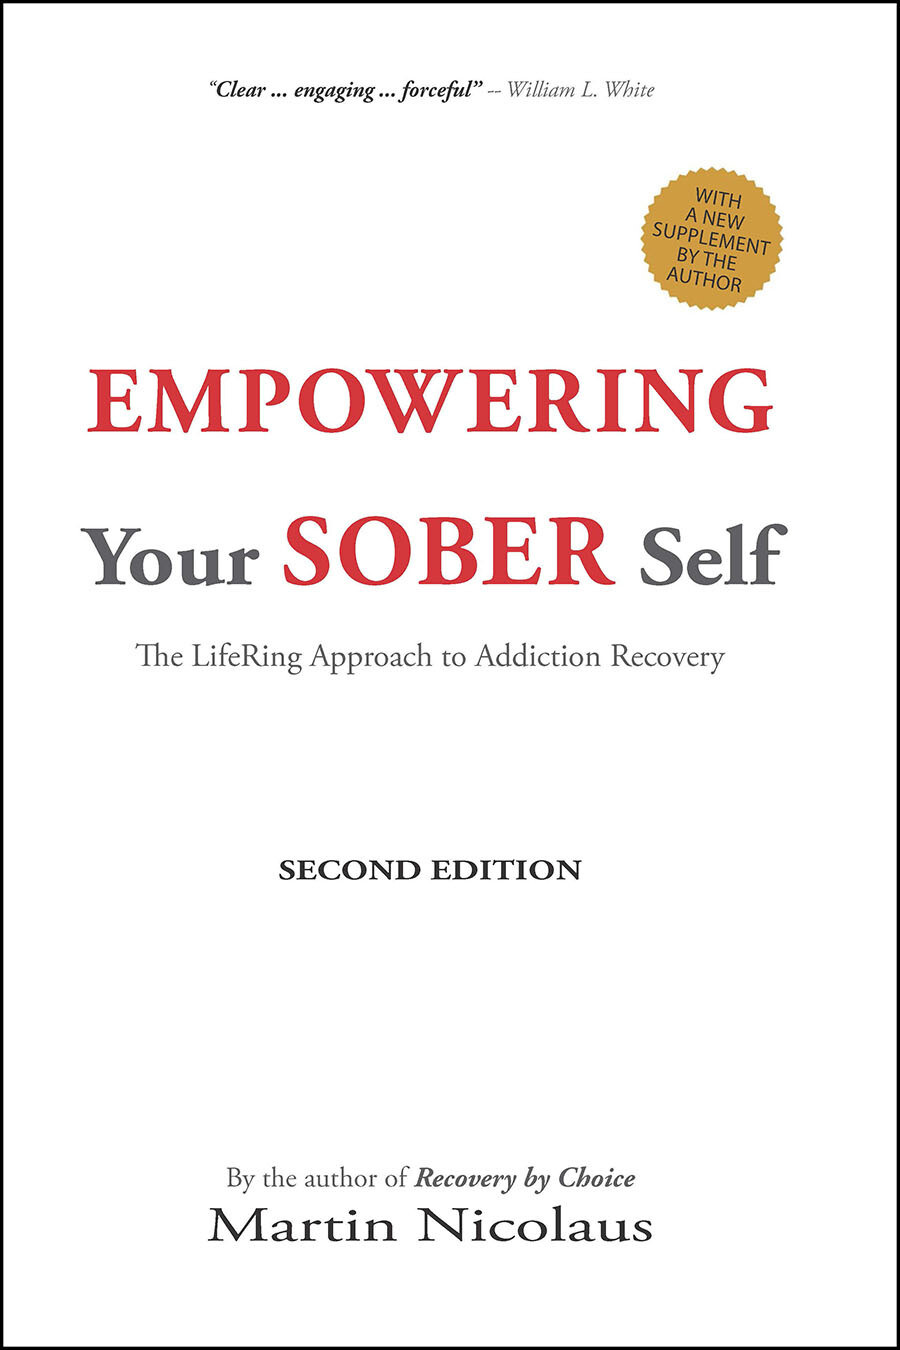 Empowering Your Sober Self